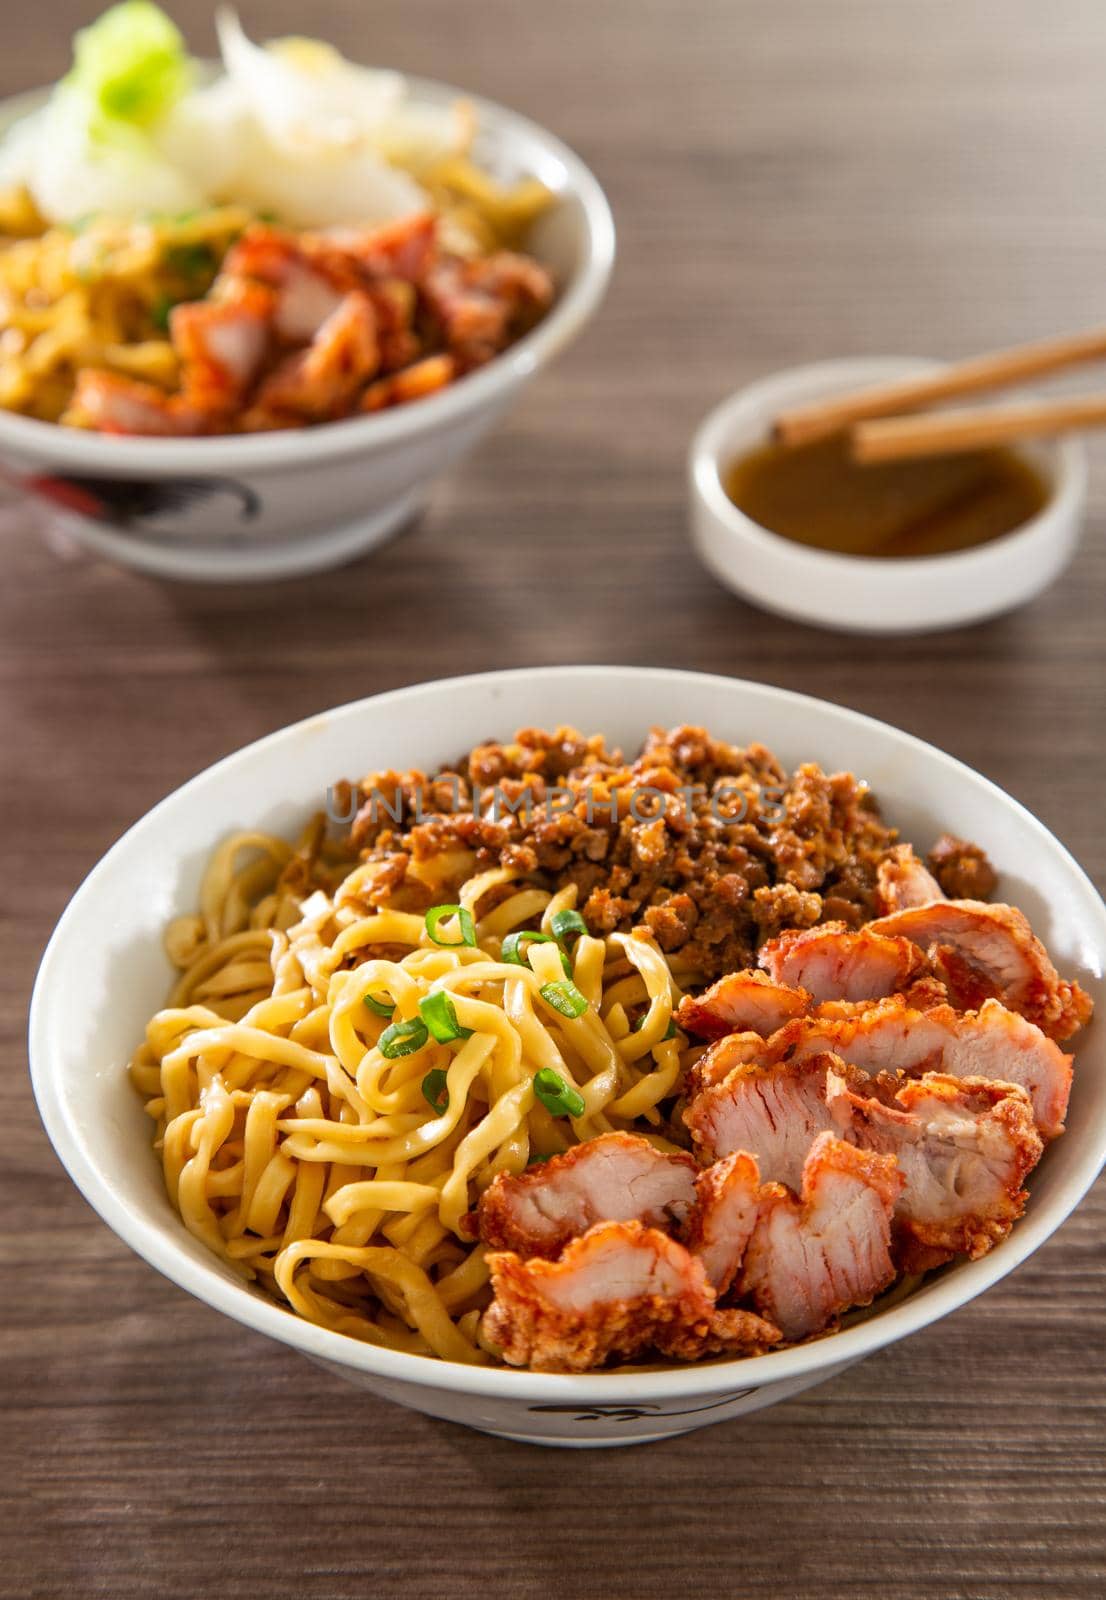 A Kolo Mee is a Sarawak Malaysian dish of dry noodles tossed in a savoury pork and shallot mixture, topped off with fragrant fried onions.